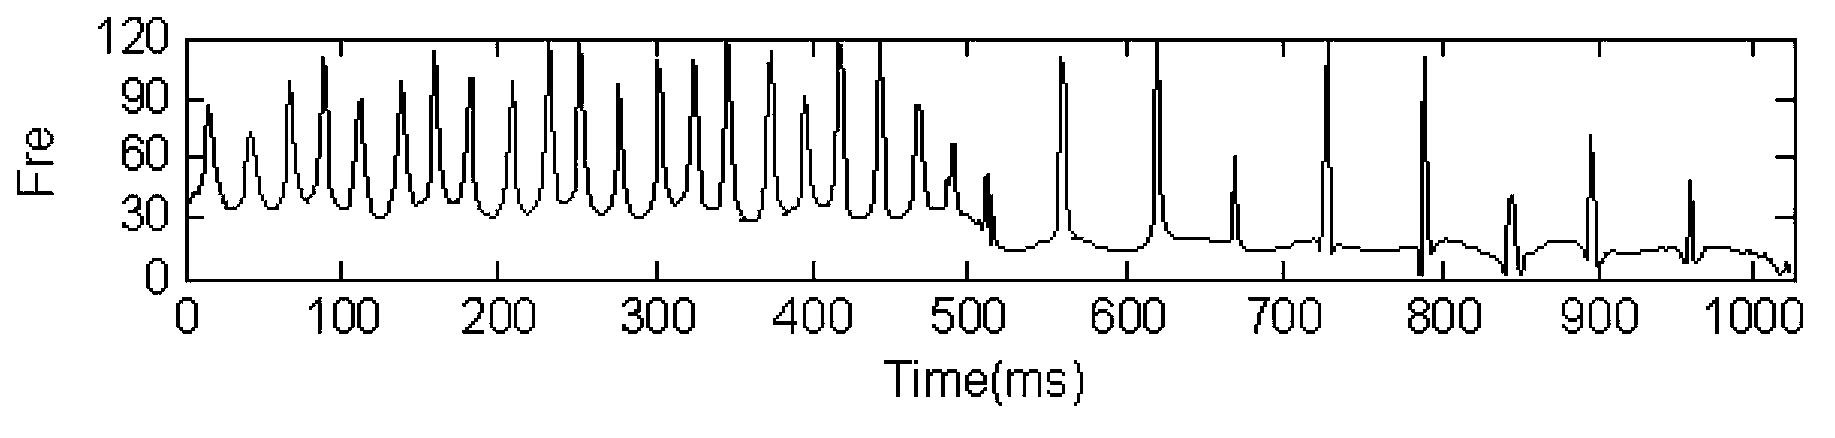 High-precision time-frequency analysis method